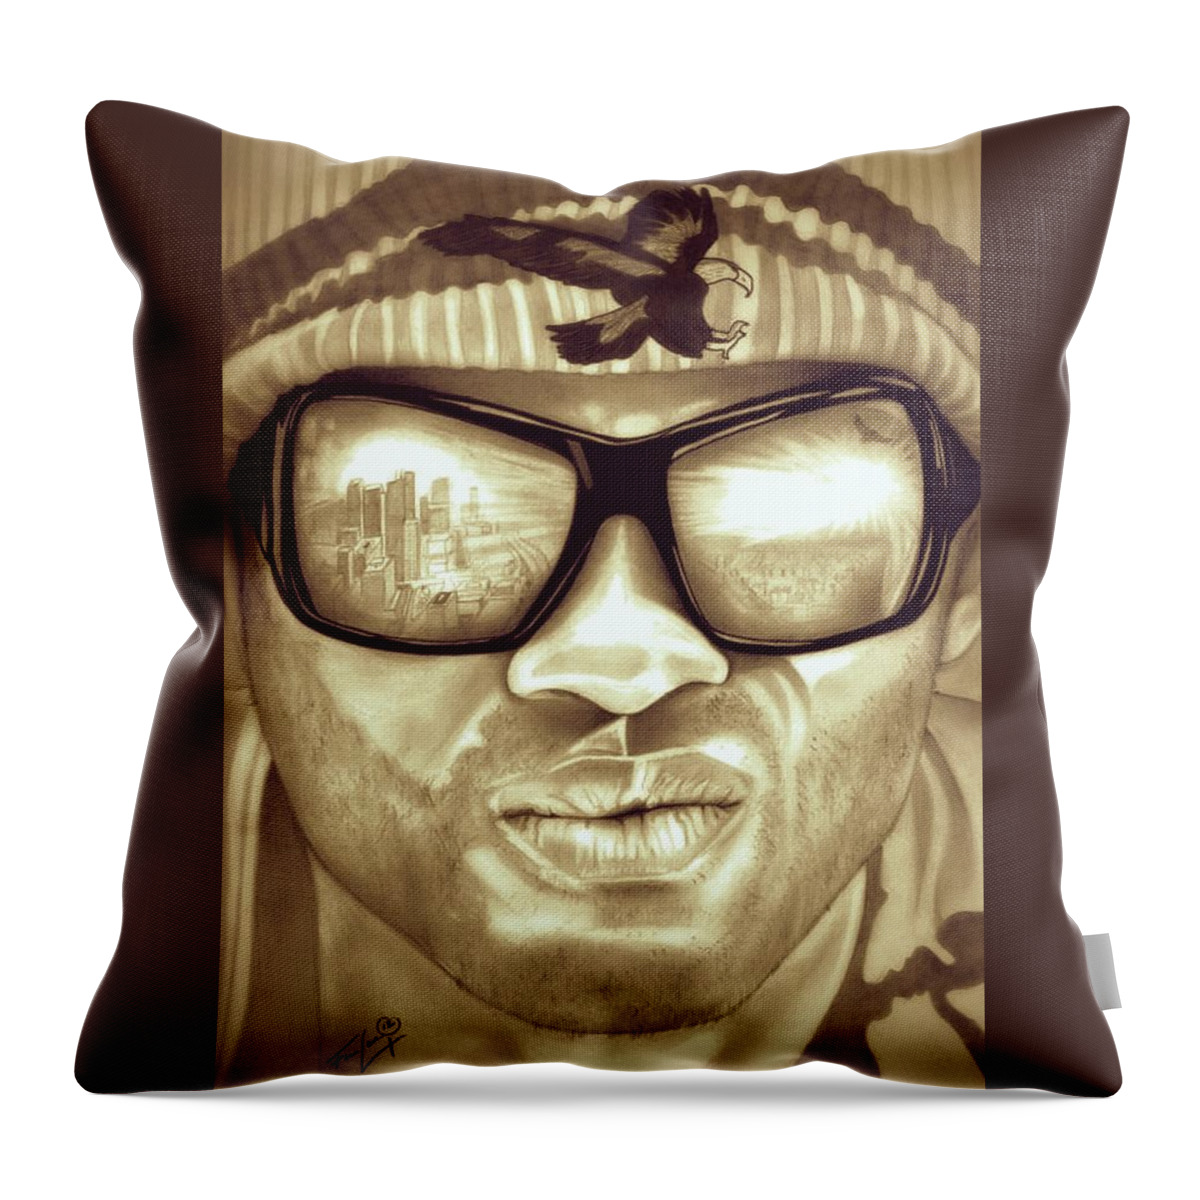 Will Smith Throw Pillow featuring the drawing John Hancock - Will Smith - Hancock Sepia Edition by Fred Larucci